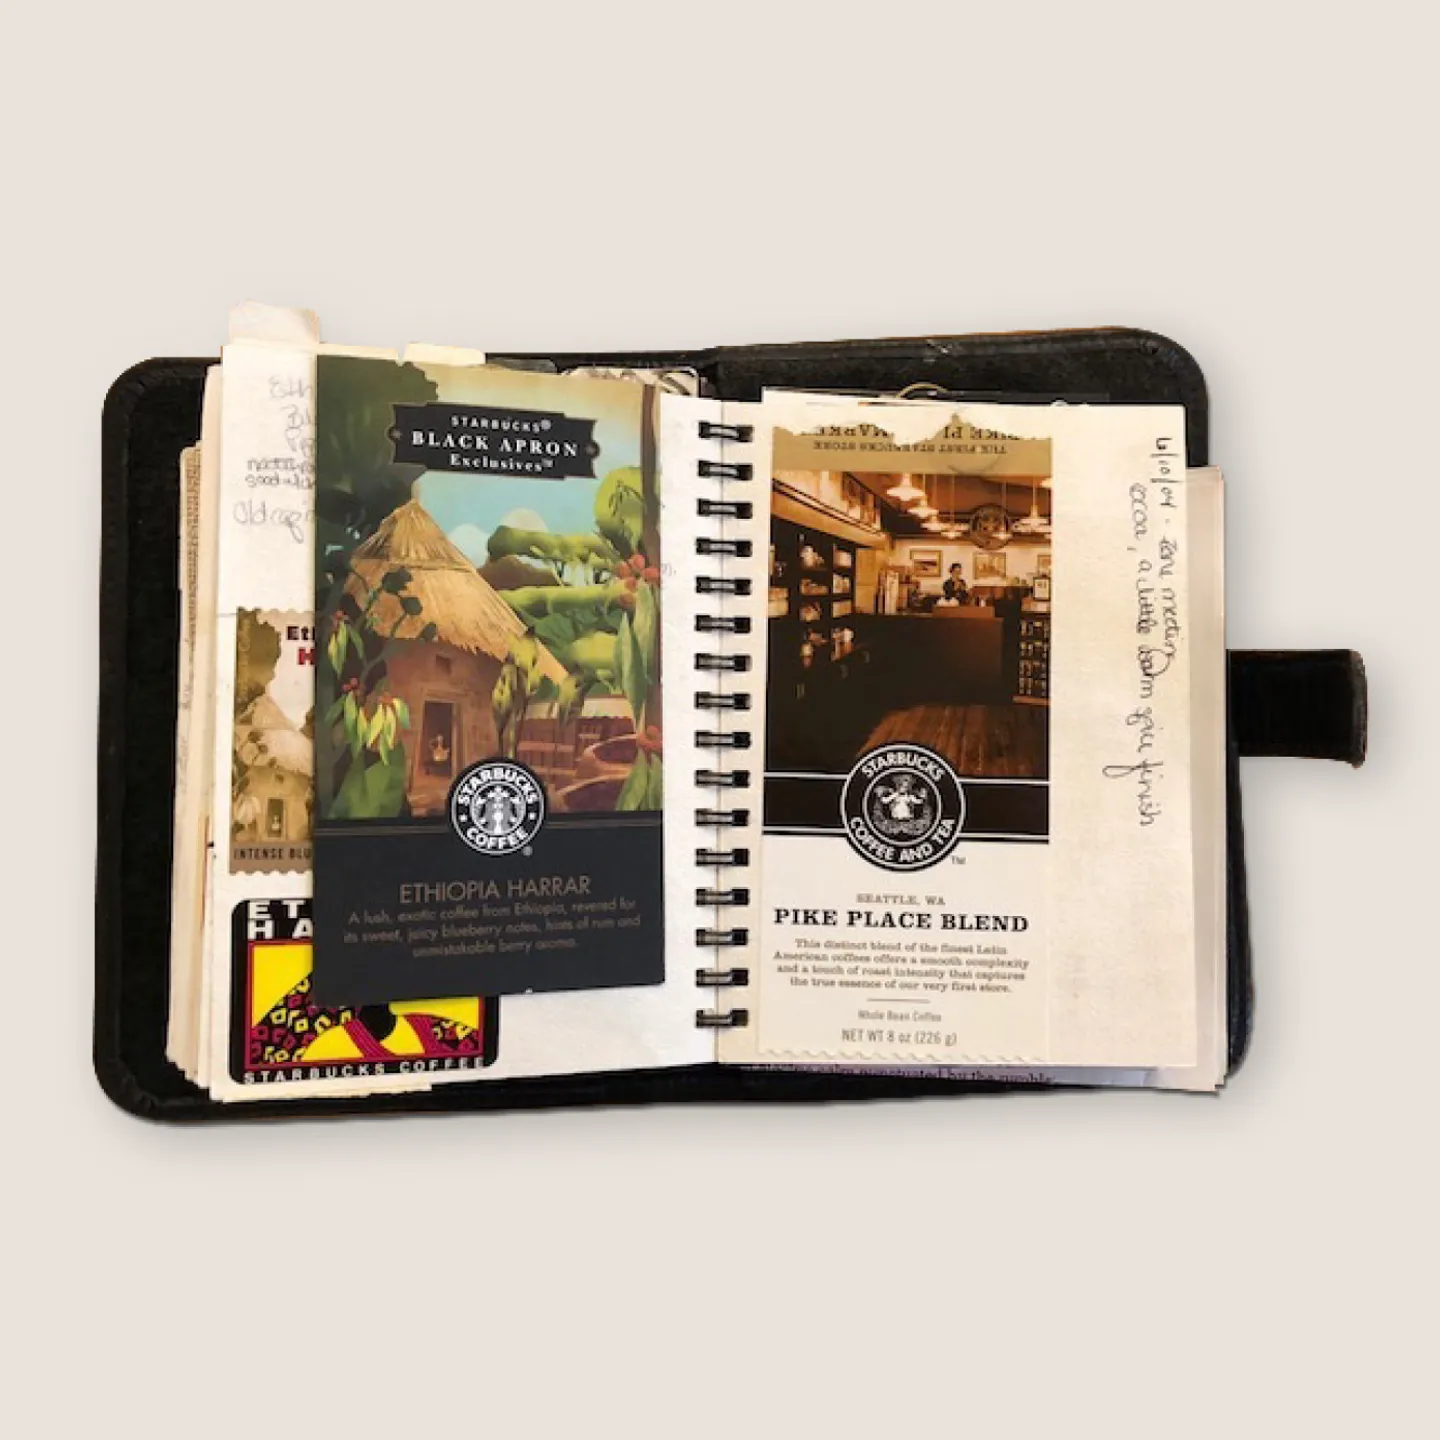 Photo of a coffee journal with notes and packaging samples